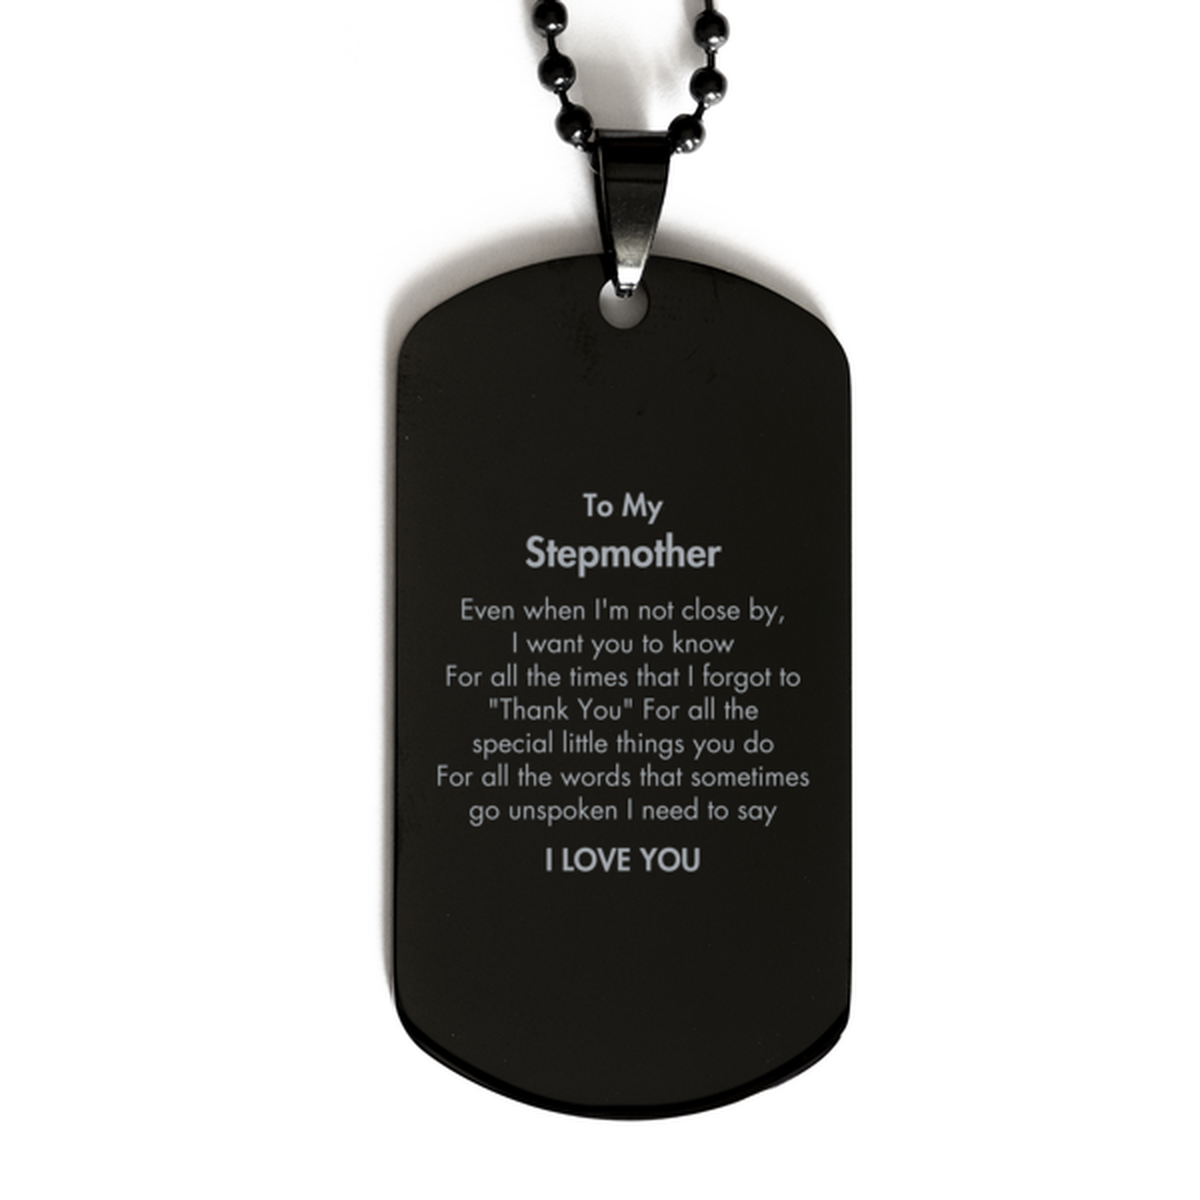 Thank You Gifts for Stepmother, Keepsake Black Dog Tag Gifts for Stepmother Birthday Mother's day Father's Day Stepmother For all the words That sometimes go unspoken I need to say I LOVE YOU